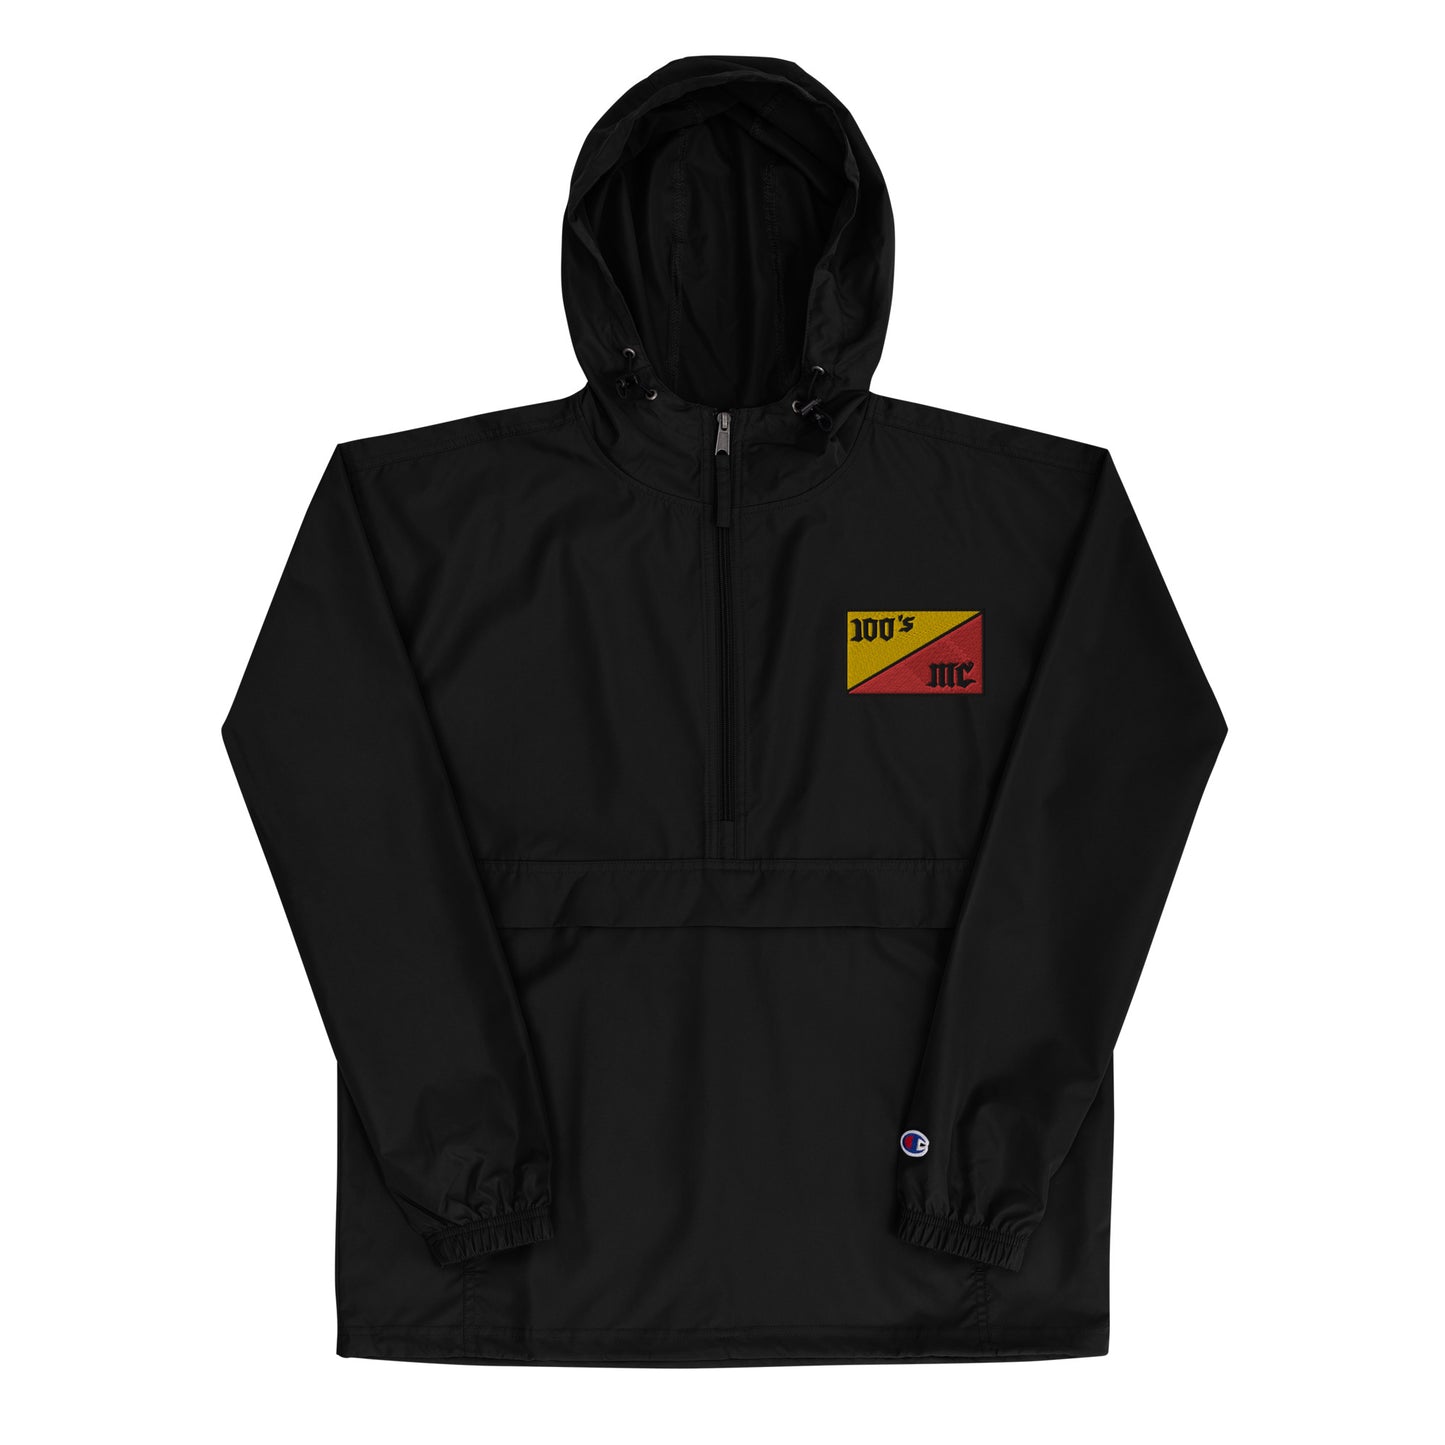 100s MC Embroidered Champion Packable Jacket